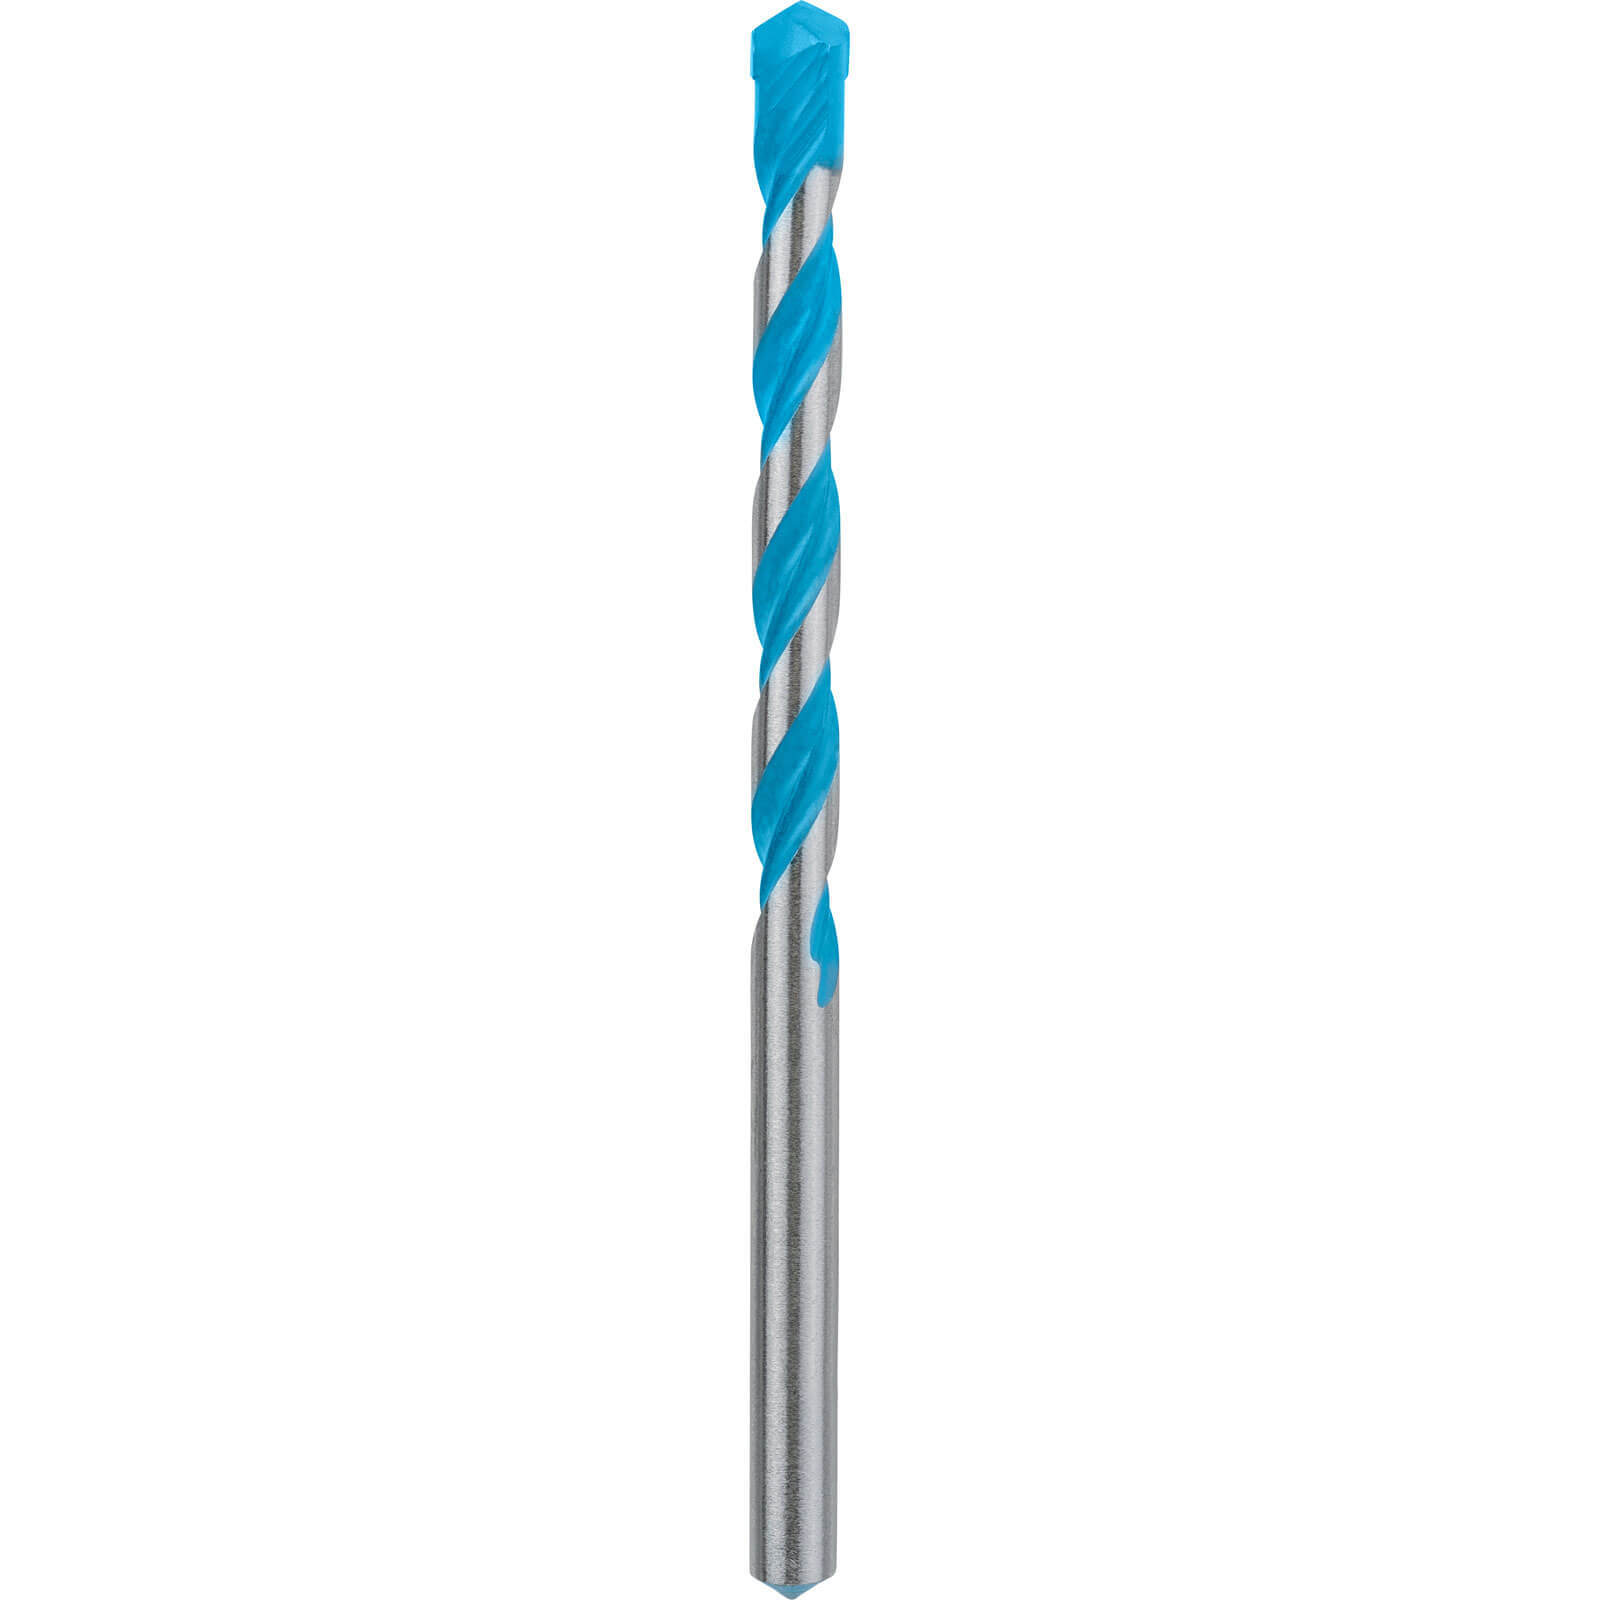 Image of Bosch Expert CYL-9 Multi Construction Drill Bit 6mm 100mm Pack of 10